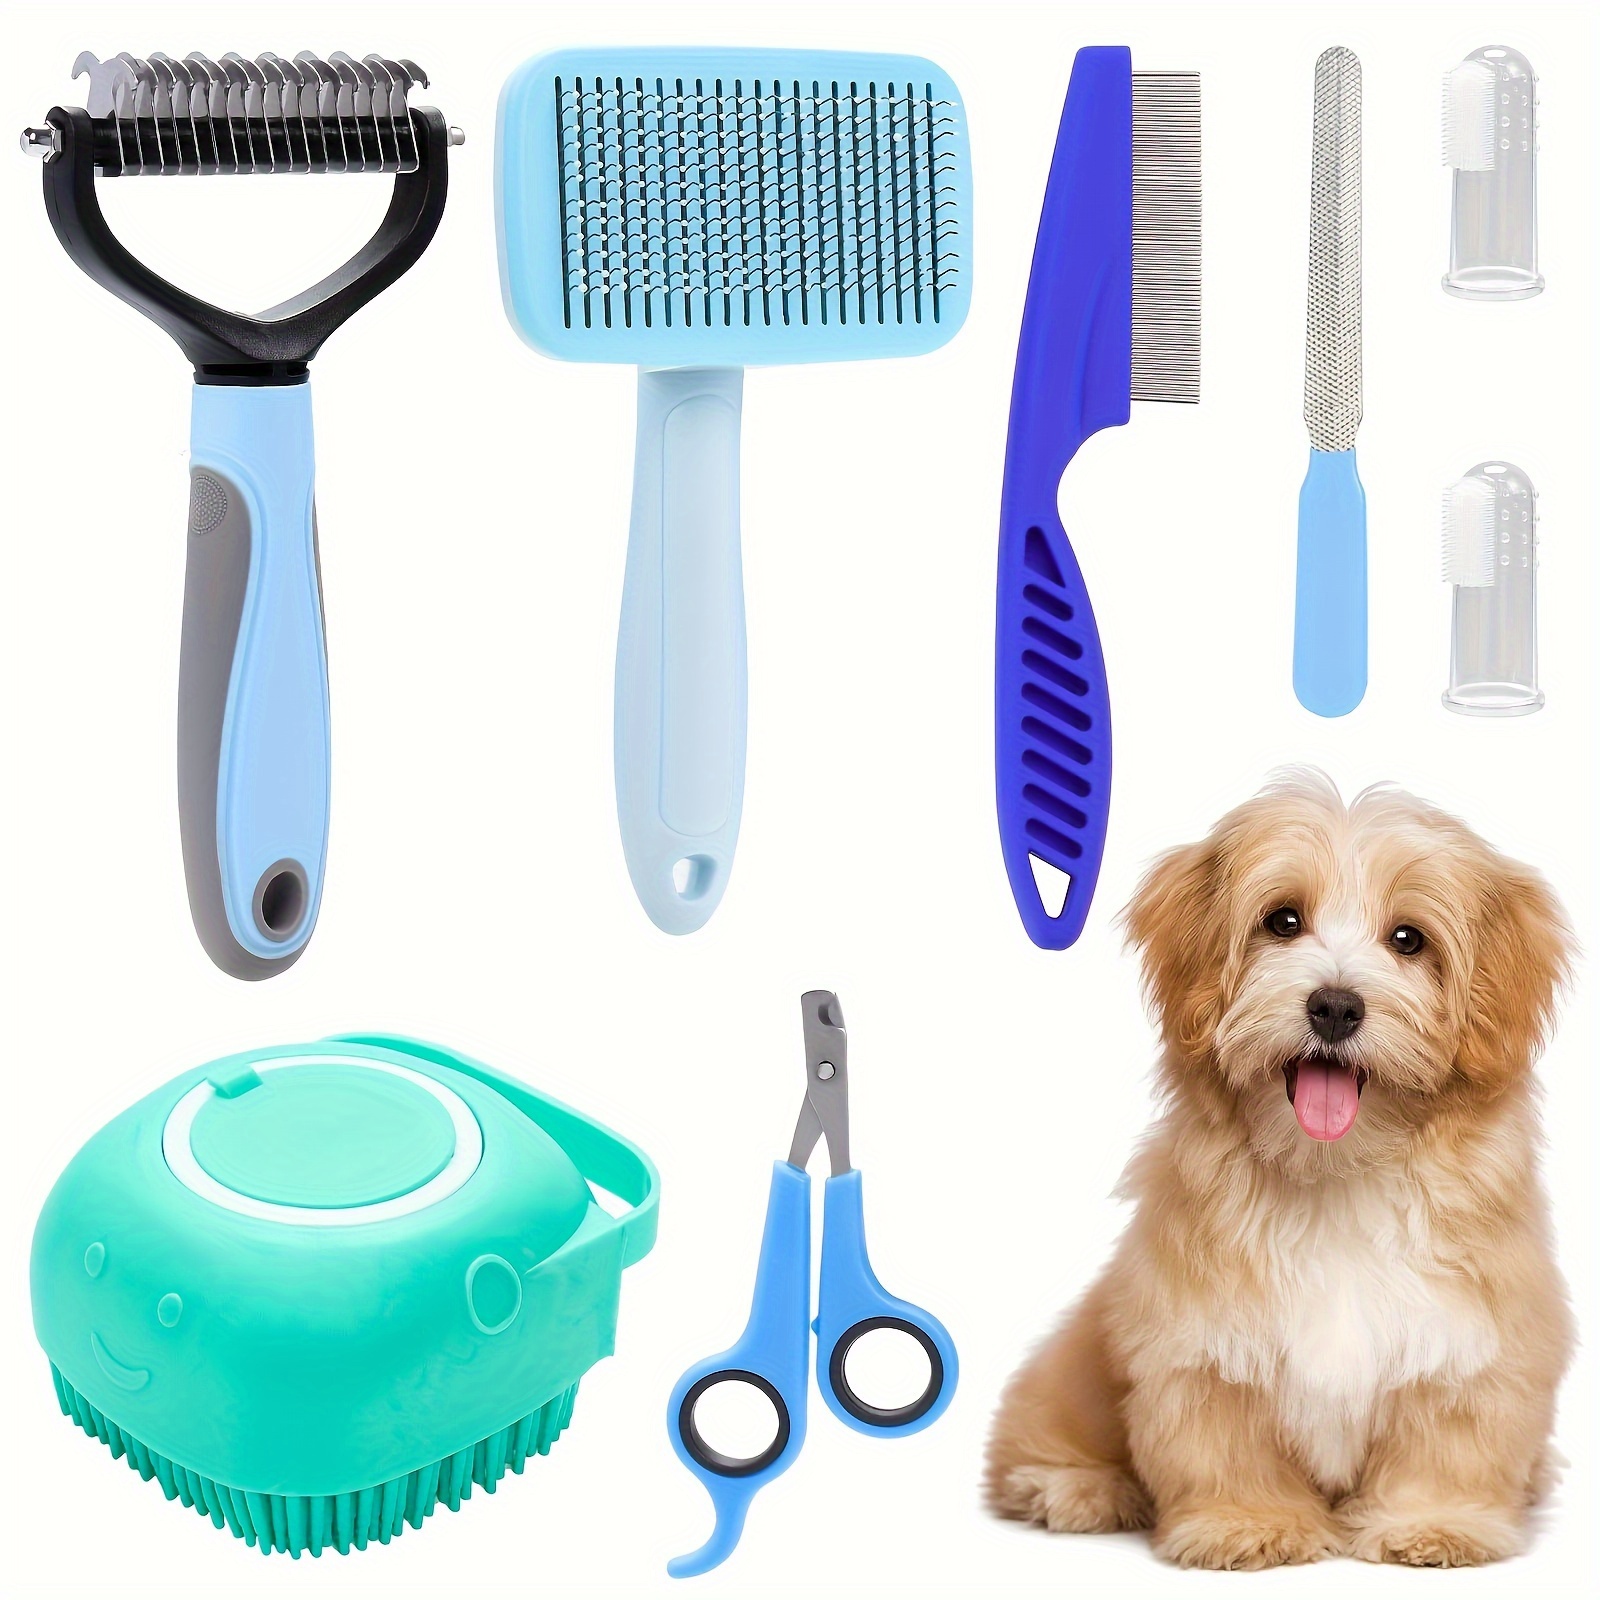 

8pcs Pet Grooming Kit Set With Self-cleaning Slicker Brush, Nail Clippers & File, Flea Comb, Bath Brush, Shedding Comb, Silicone Toothbrush For Dogs, Durable Plastic Material, Essential Grooming Tools